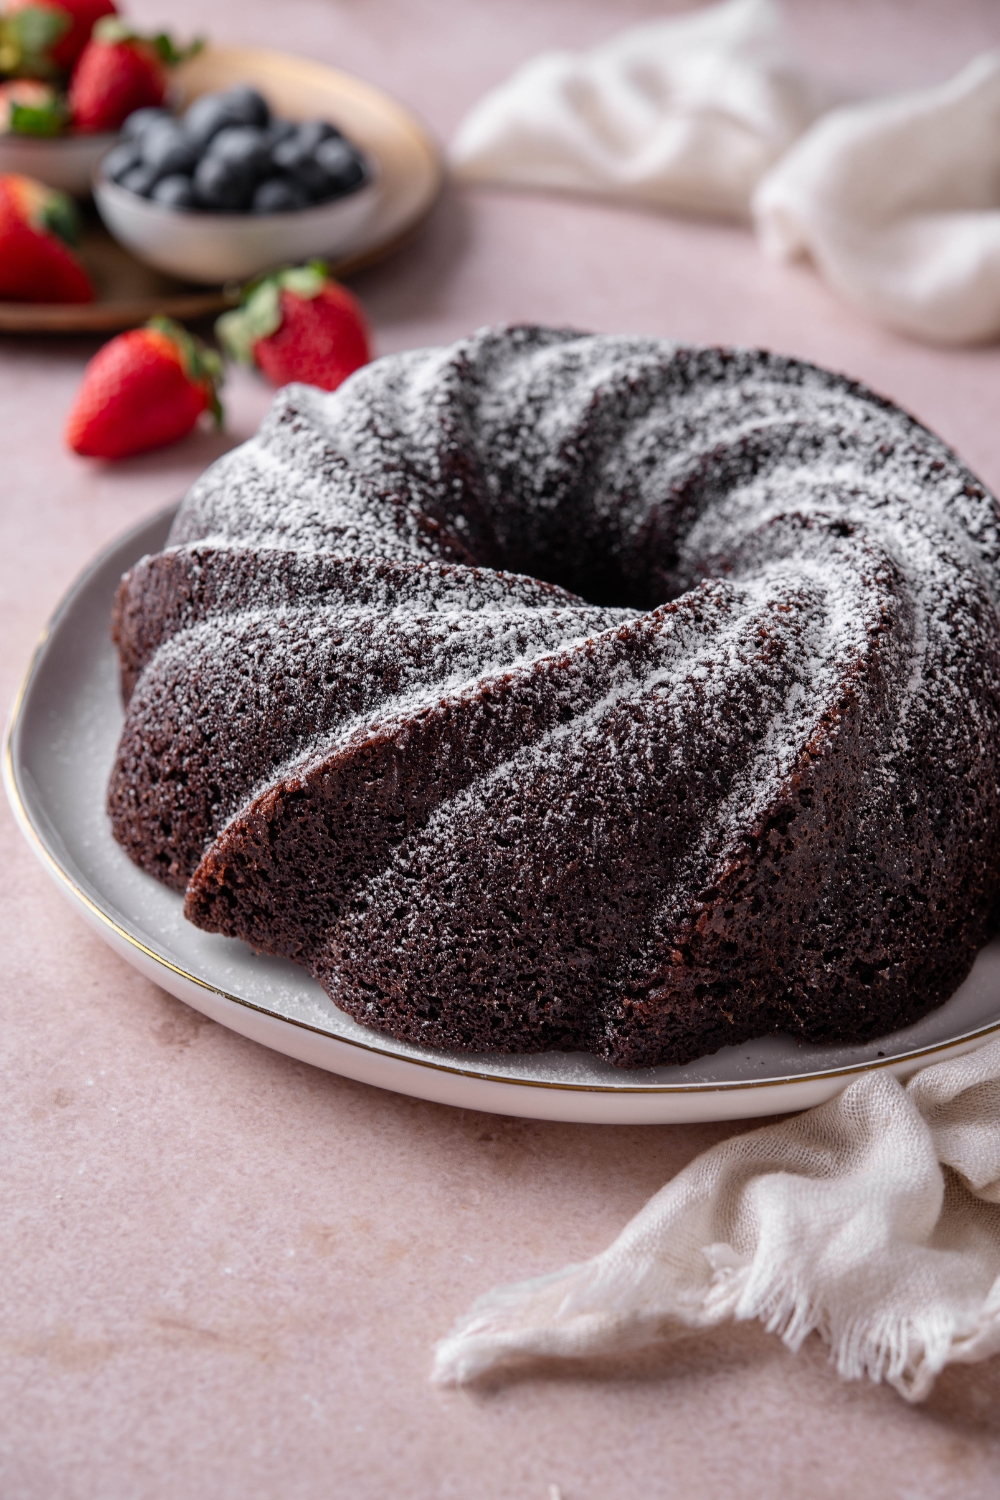 A whole chocolate pound cake is sitting on a white serving plate. Fresh berries are near by.